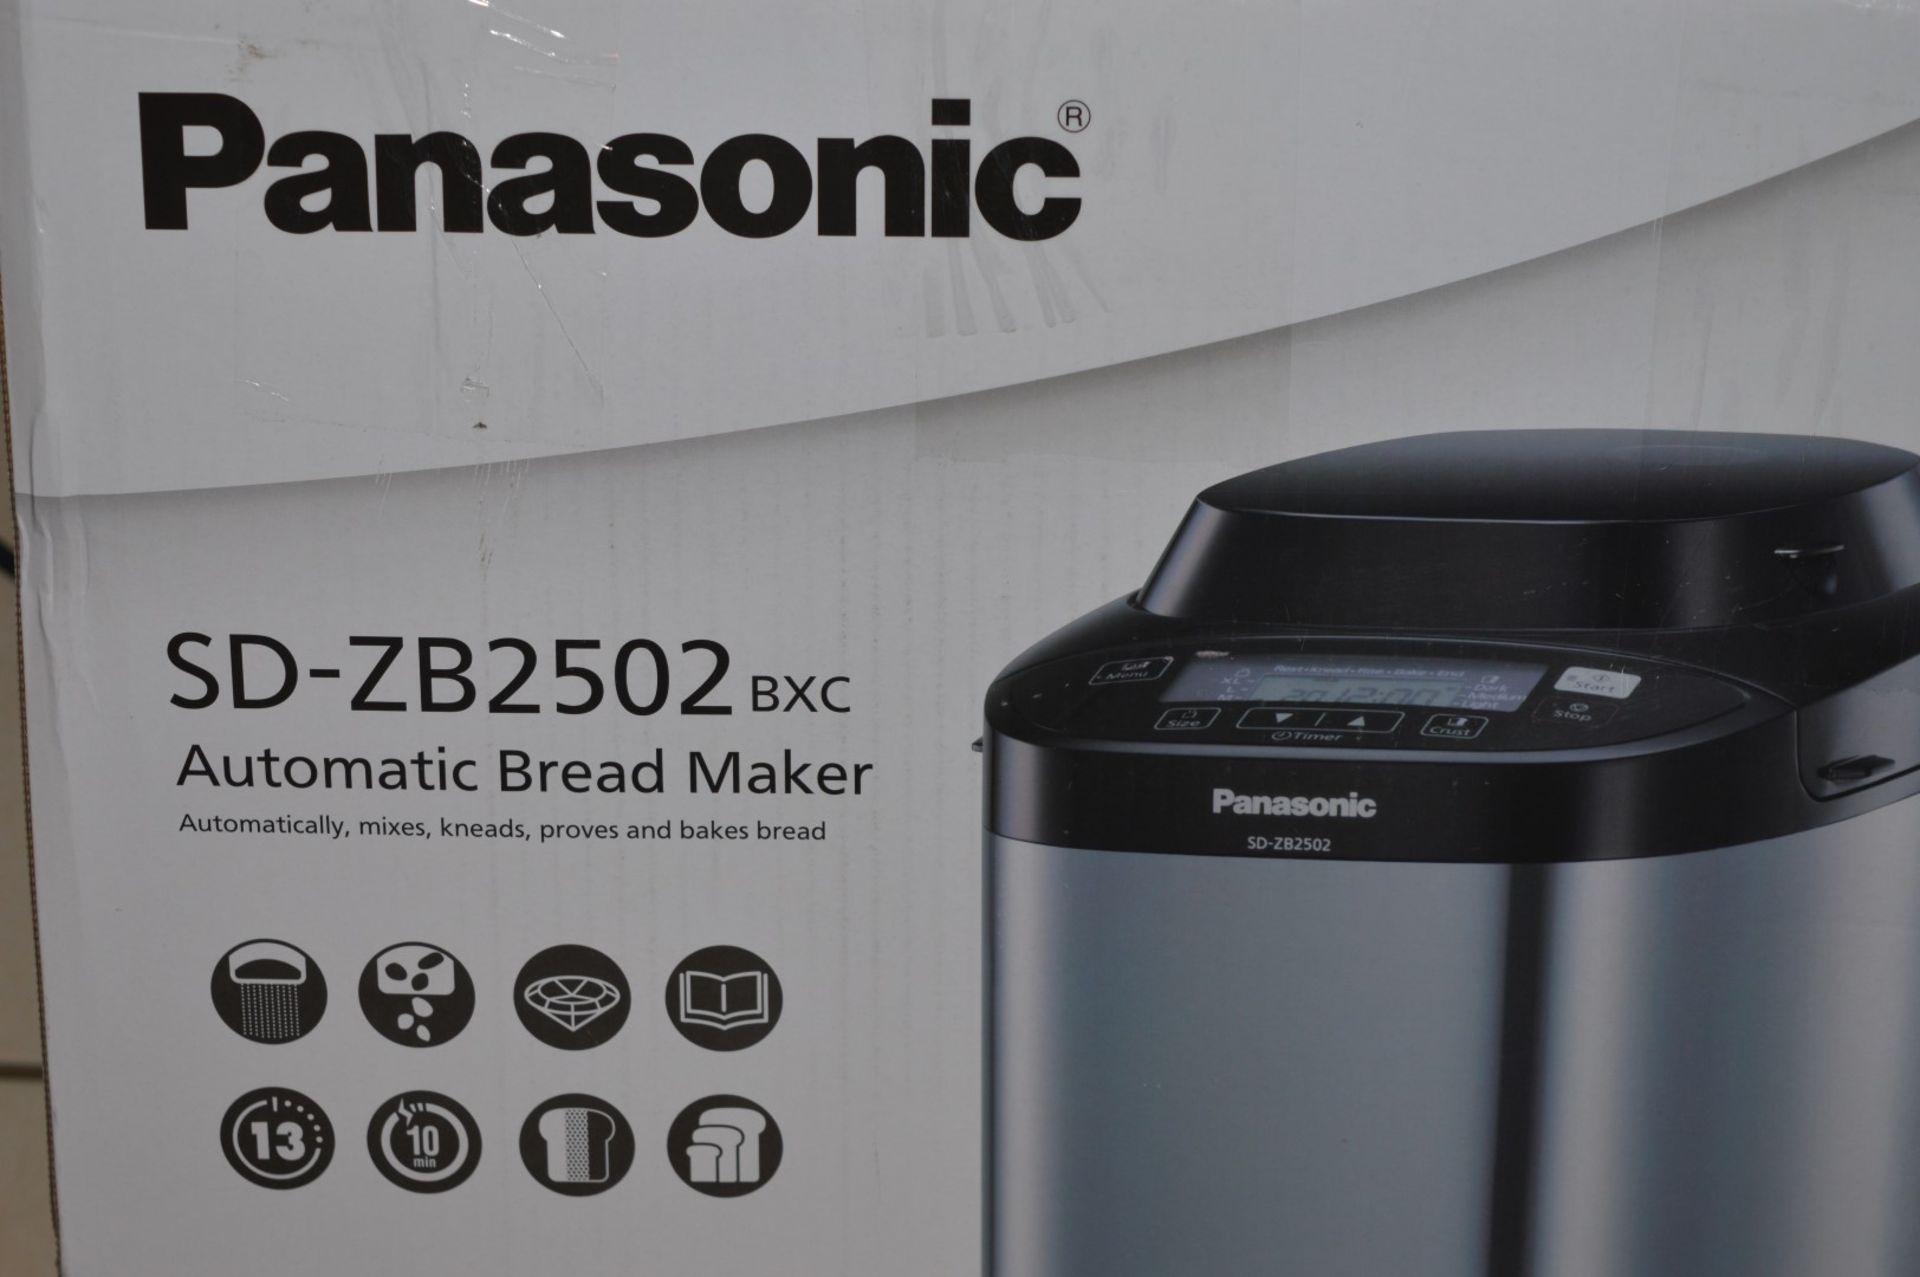 1 x Panasonic SD-ZB2502 Bread Maker - Stylish Stainless Steel Finish - Clean Inside and Out - Good - Image 5 of 5